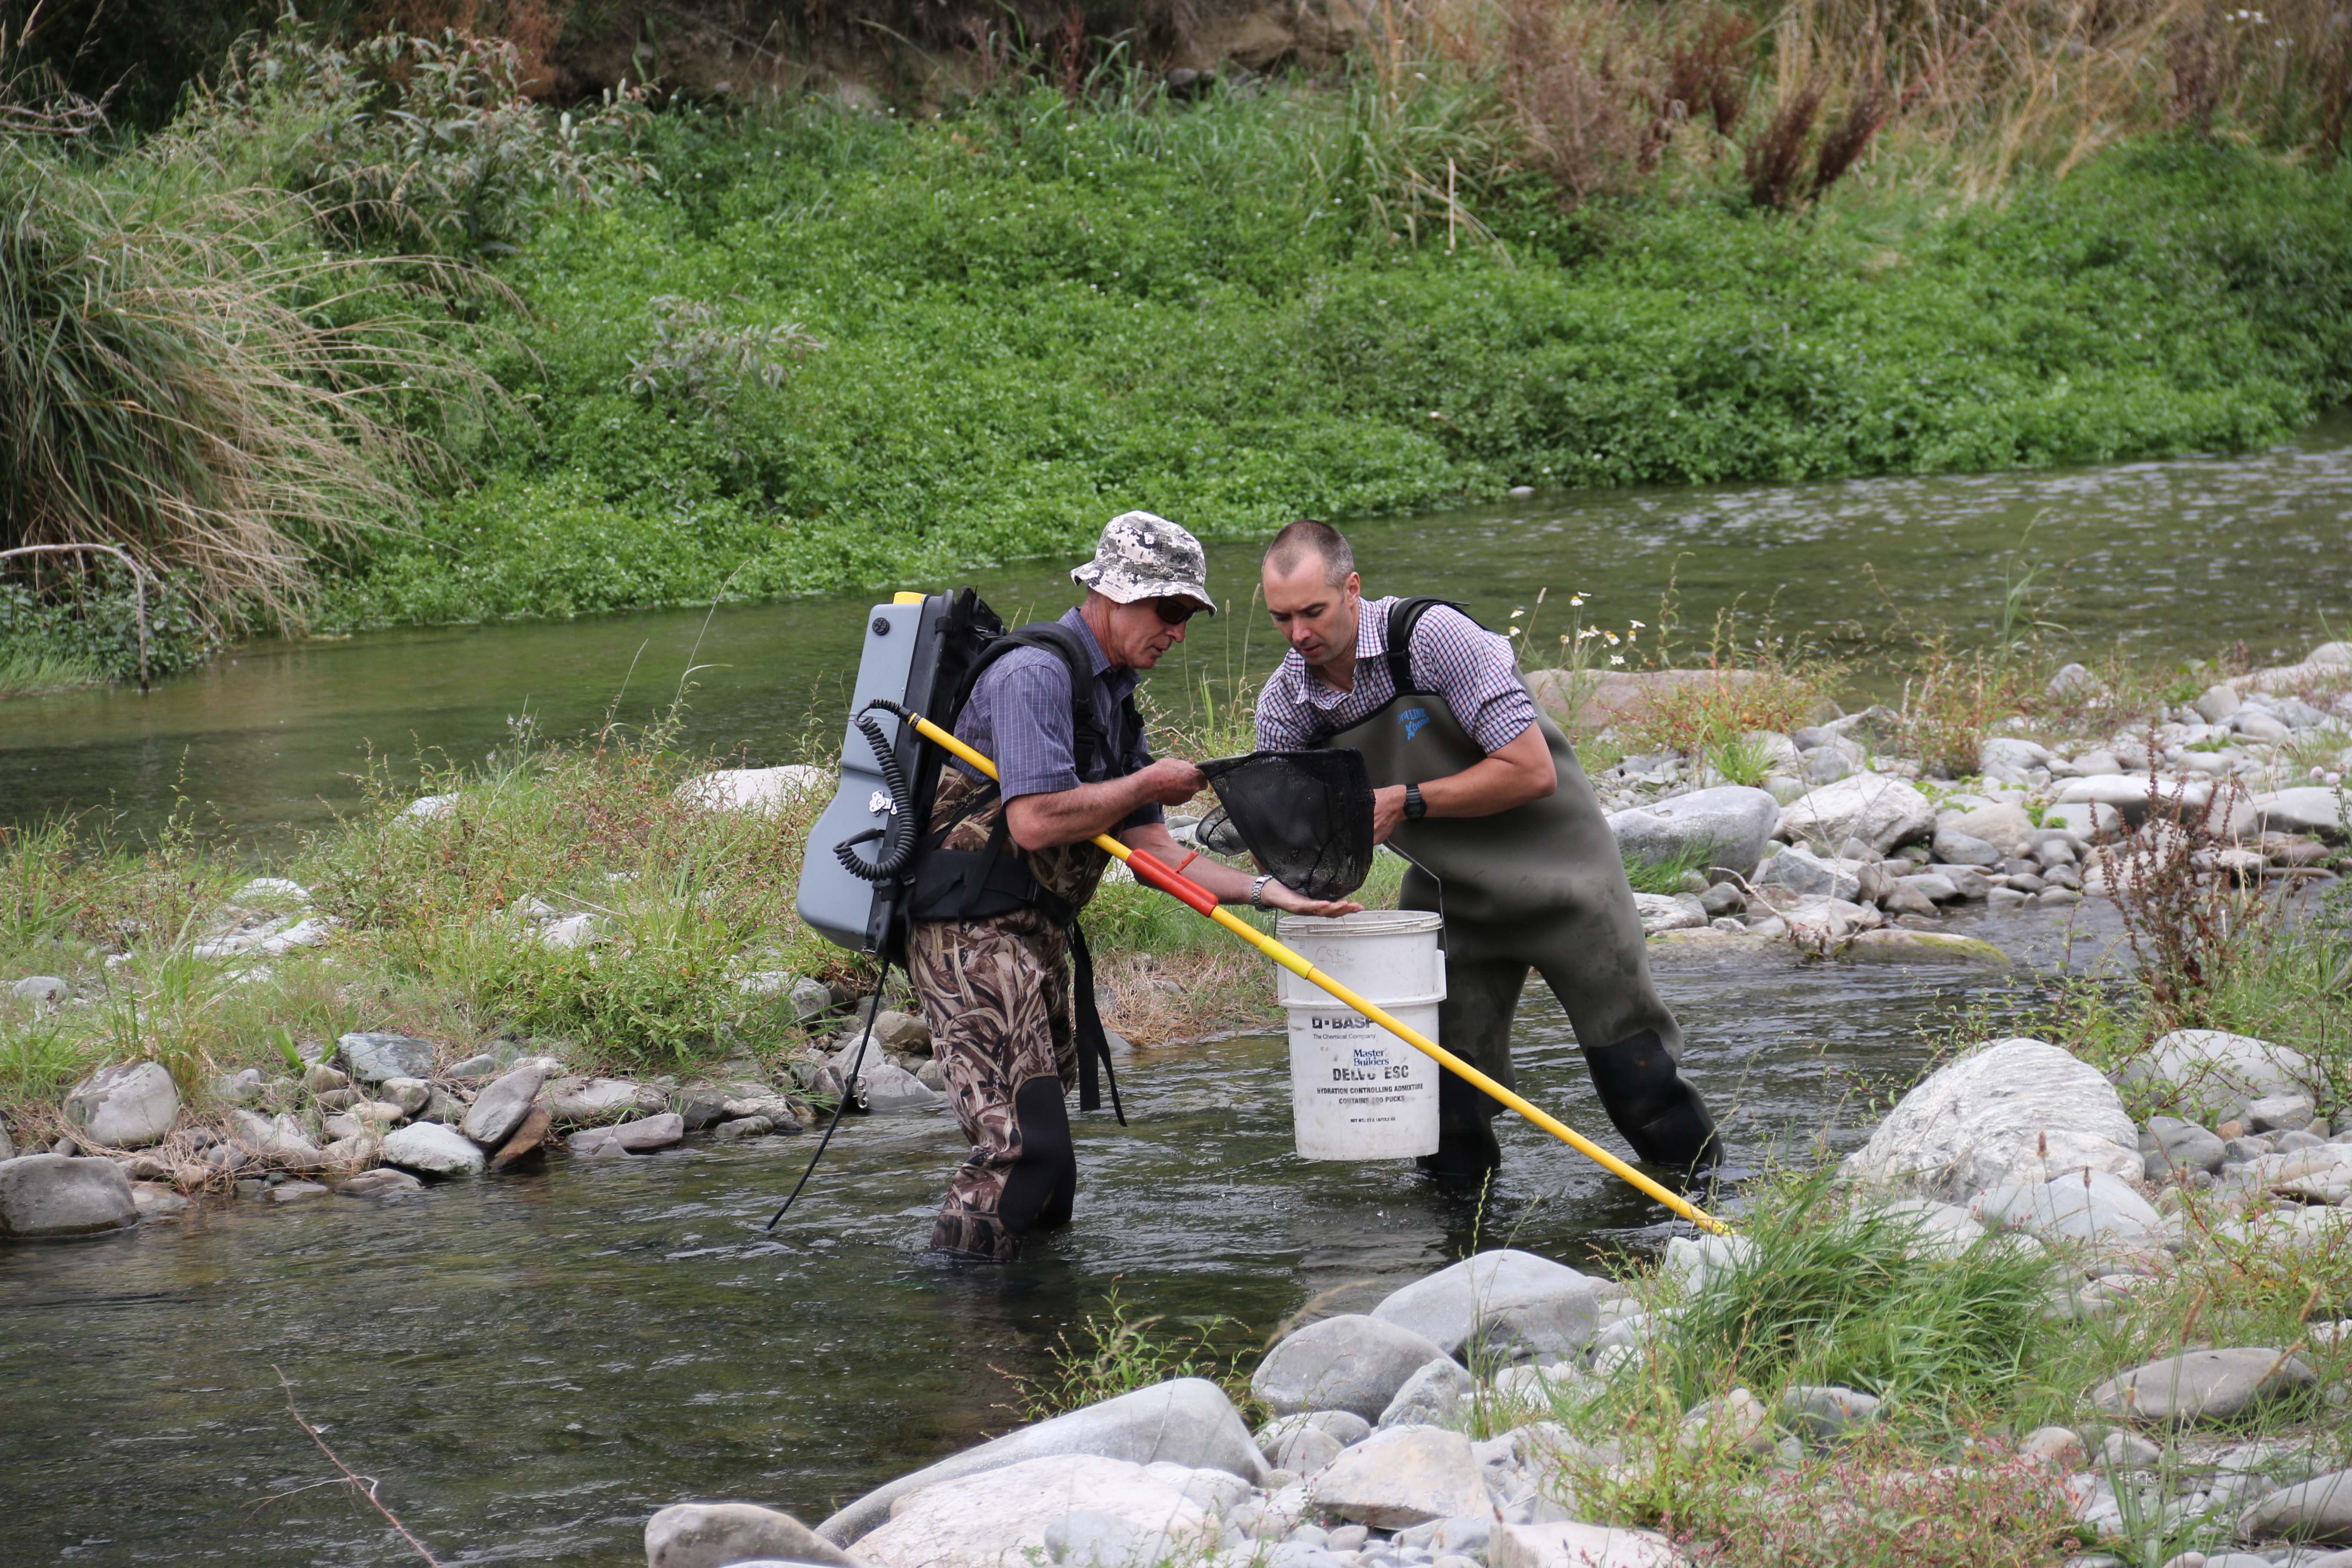 Two men investigate a New Zealand river